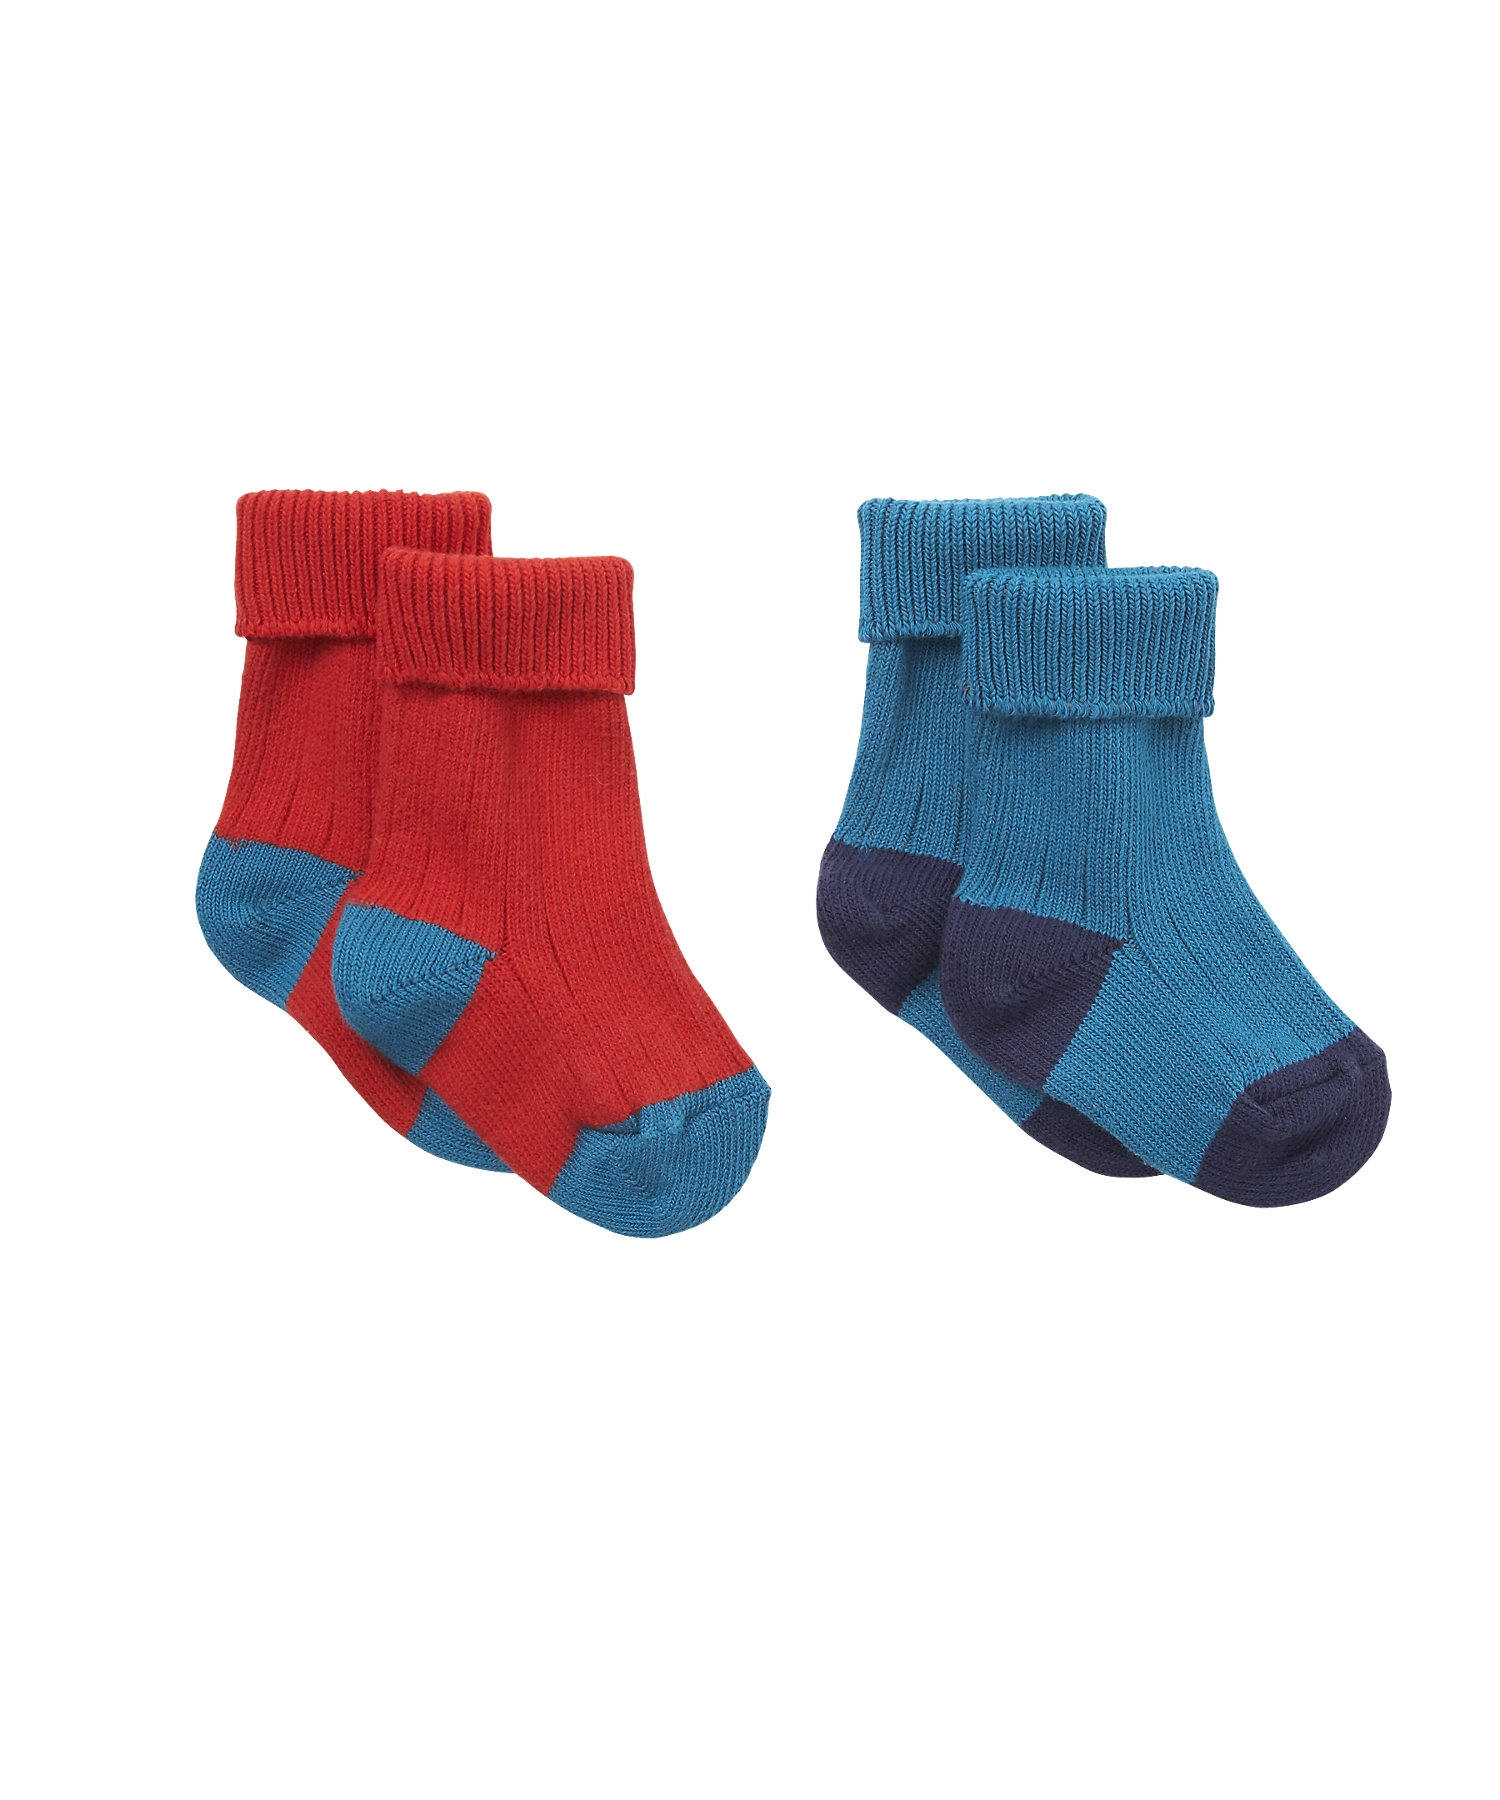 Mothercare | Boys Socks - Pack Of 2 - Multicolor